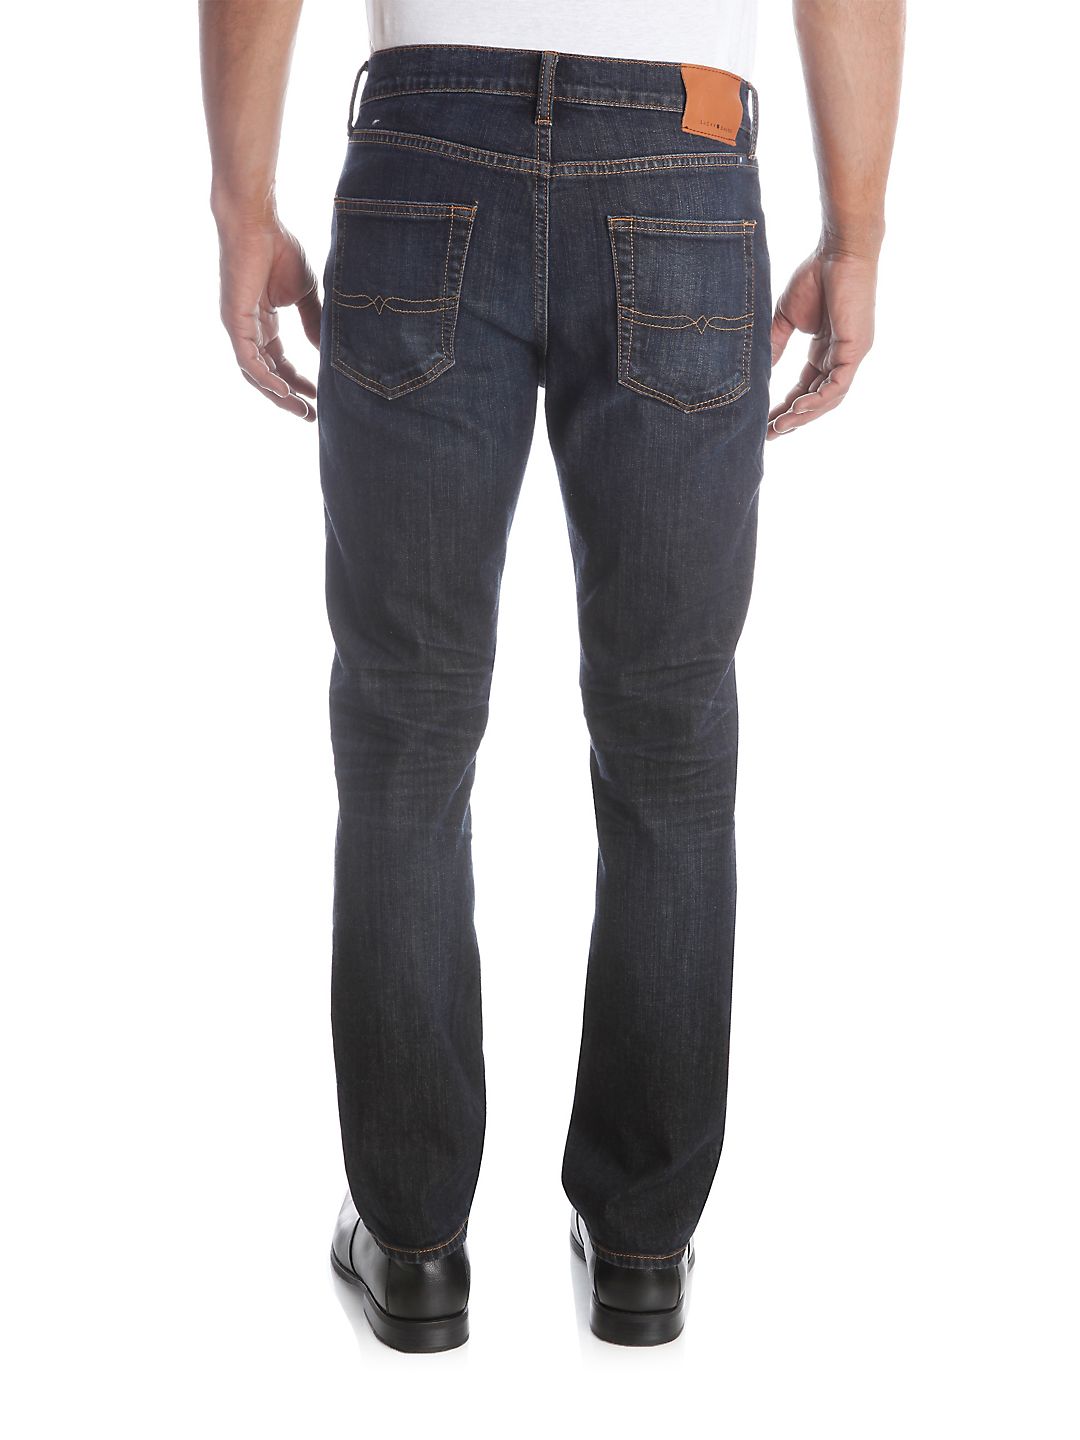 410 Athletic Fit Barite Wash Jeans - image 2 of 2